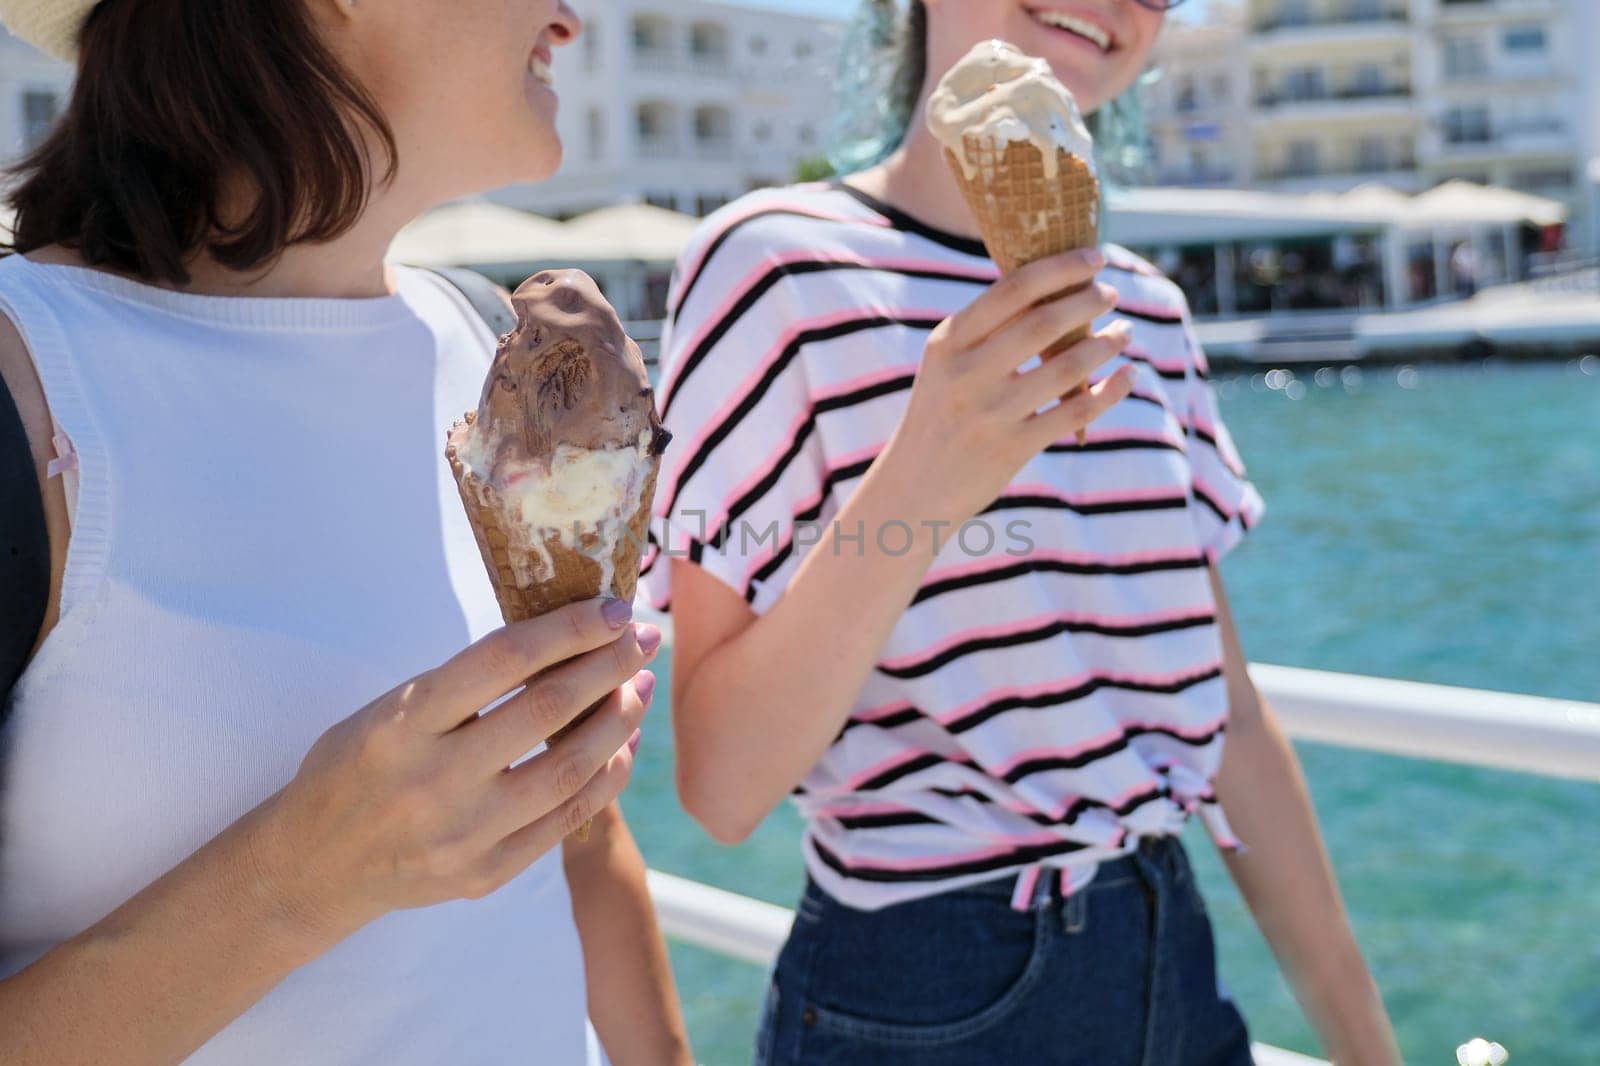 Melting ice cream in hands of smiling walking mother and daughter women on hot sunny summer day on seafront promenade